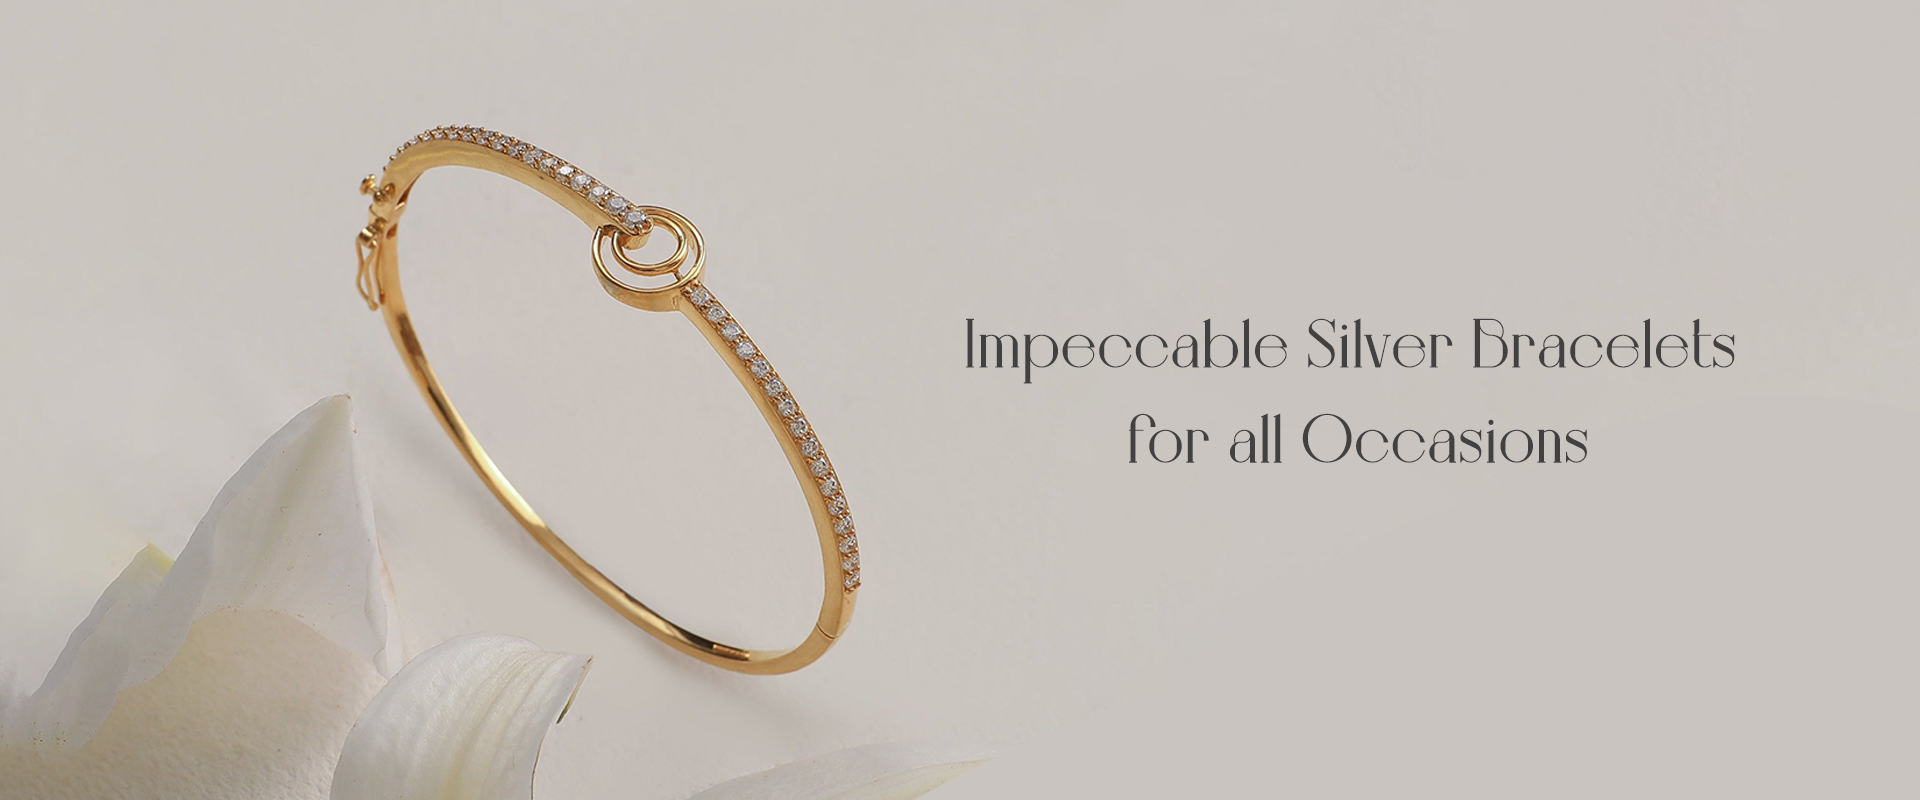 Impeccable Silver Bracelets for all Occasions